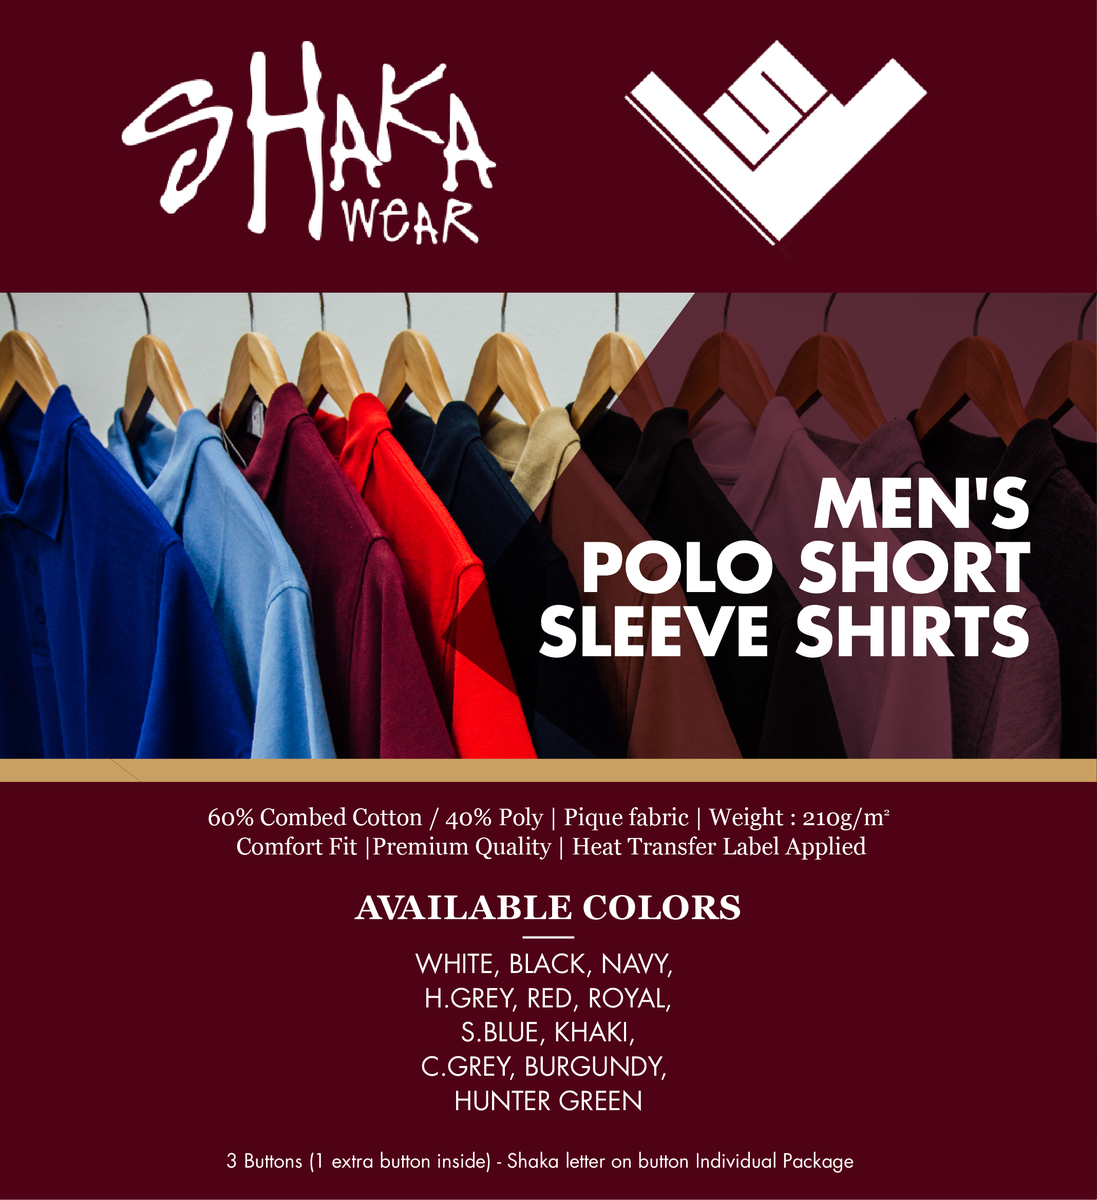 Nothing up Shakawear Polo Short Sleeve shirts other than the assortment of colors and quality comfort. #shakawear #mensfashion #comfortfit